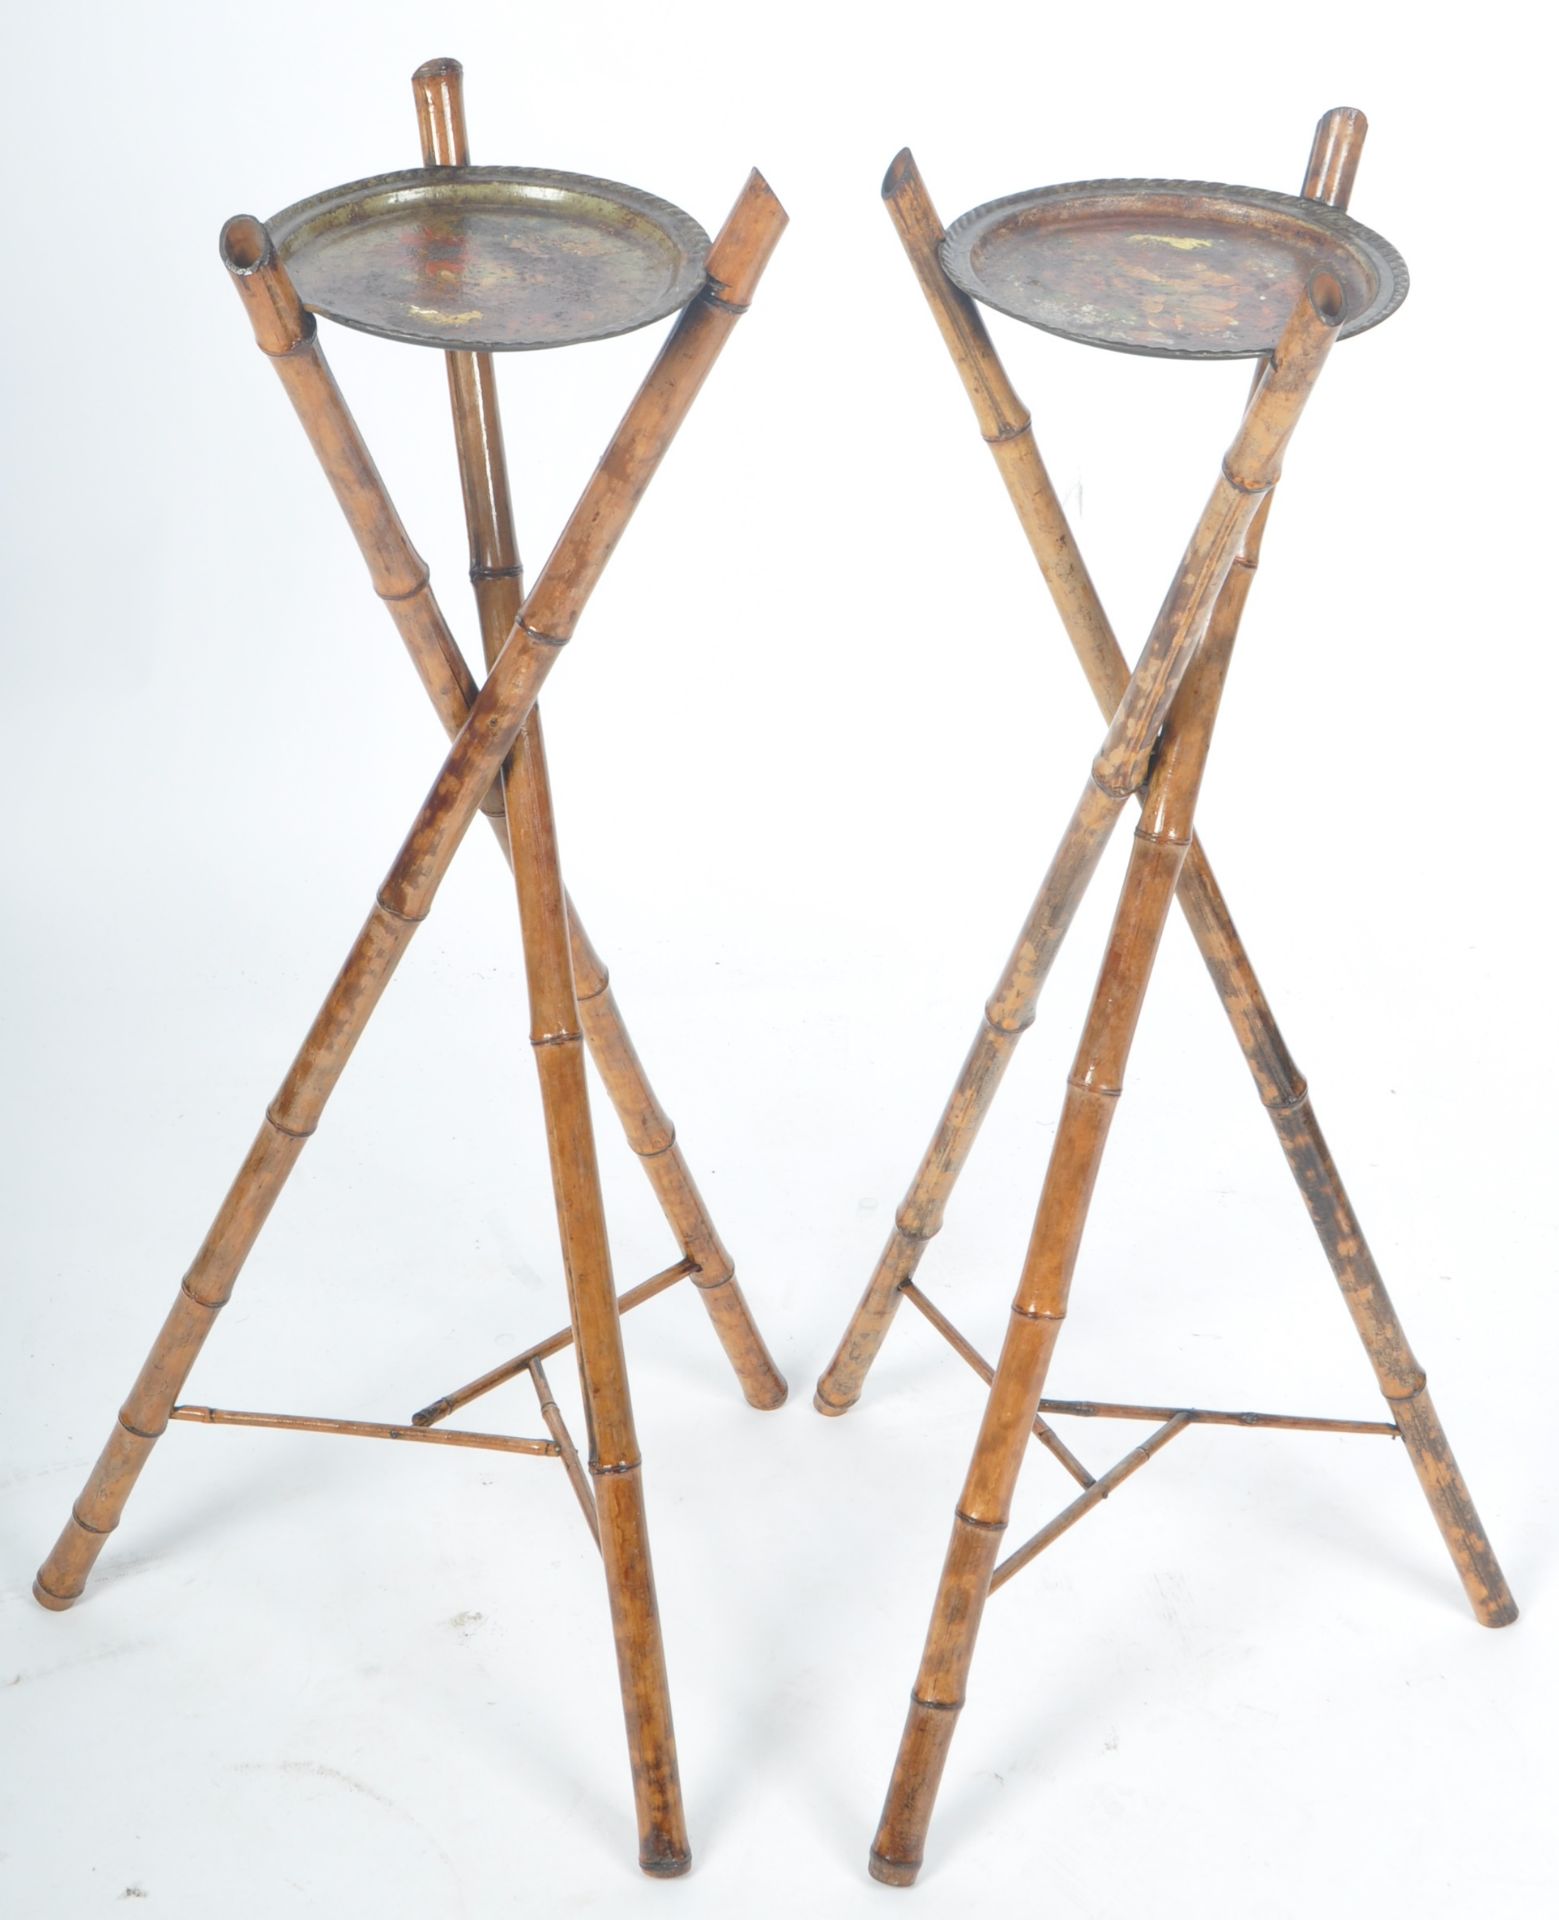 MATCHING PAIR OF 19TH CENTURY AESTHETIC MOVEMENT BAMBOO STANDS - Image 2 of 8